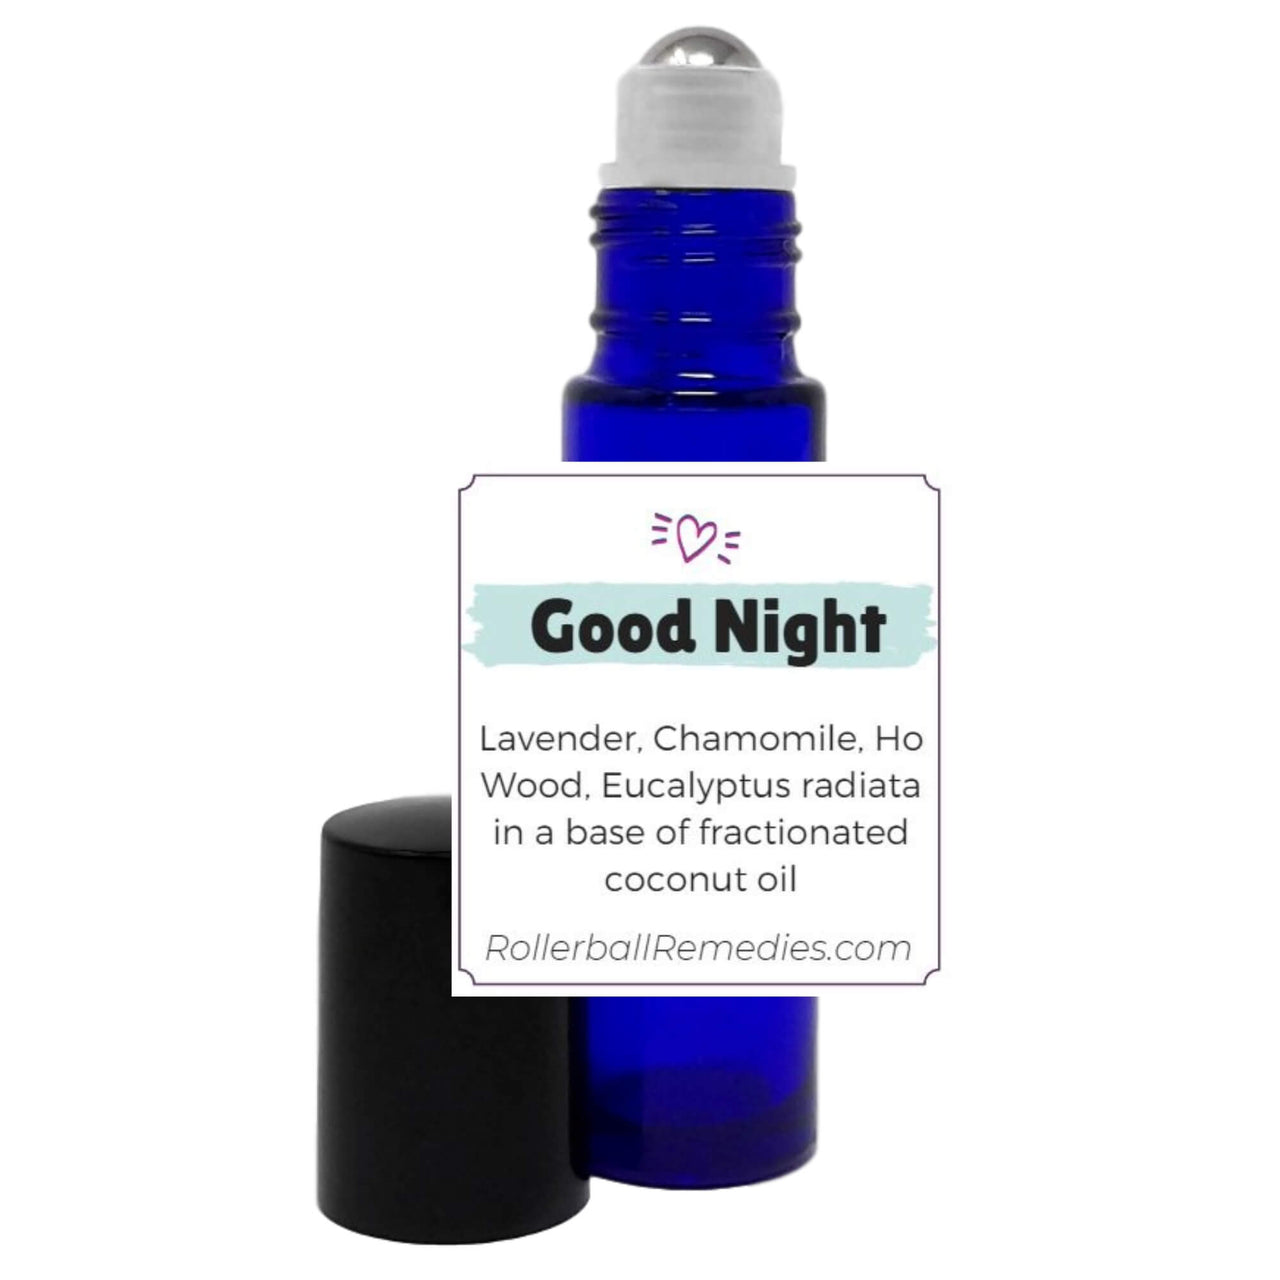 Good Night Essential Oil Blend - 10 ml Roller Bottle with Lavender, Chamomile, Ho Wood, and Eucalyptus radiata